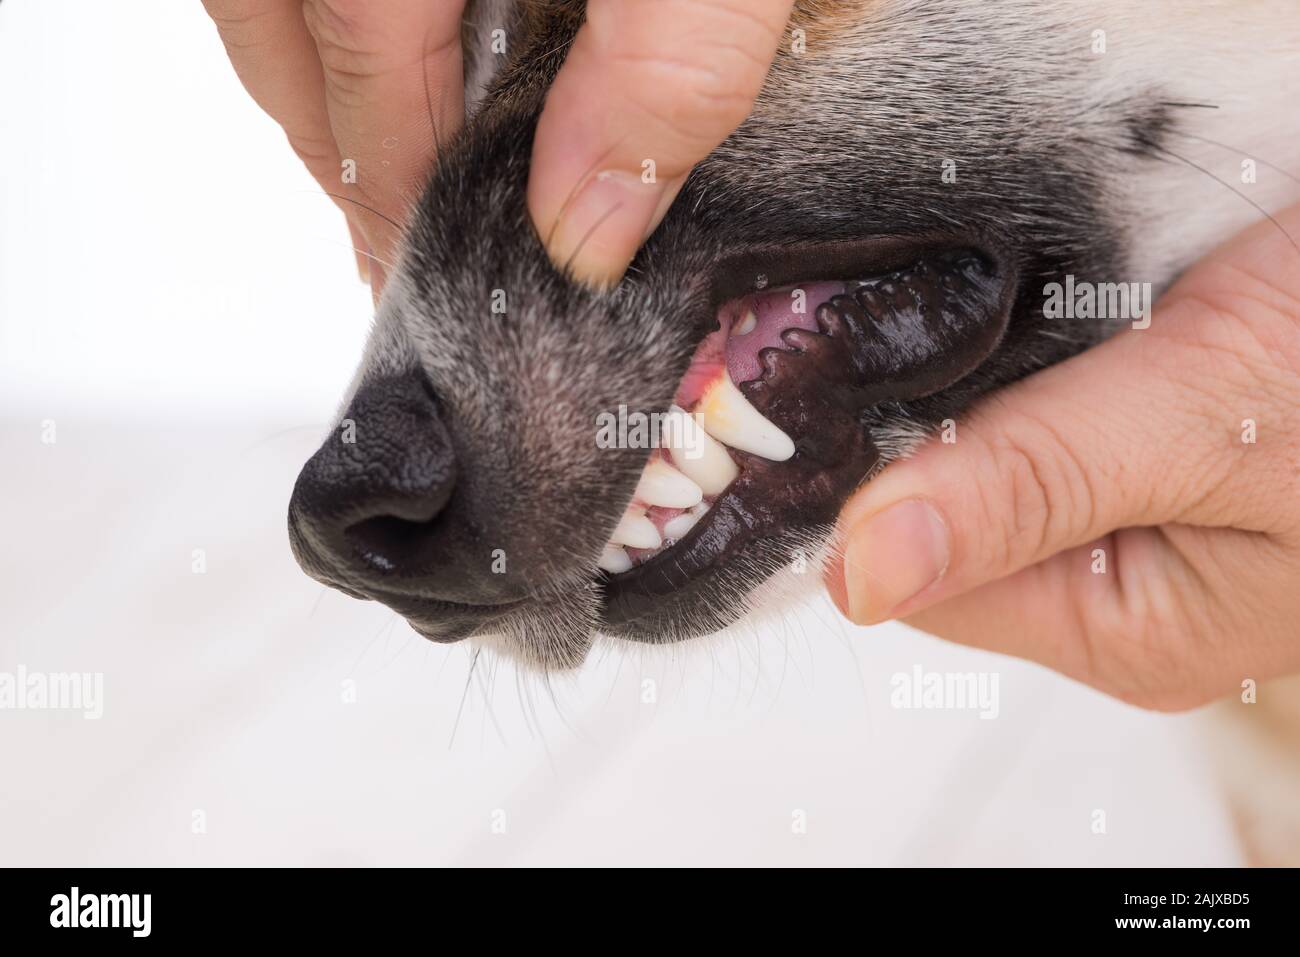 Closeup Dog Tooth Decayed Show Dirty Teeth Sign Of Dental And Gum